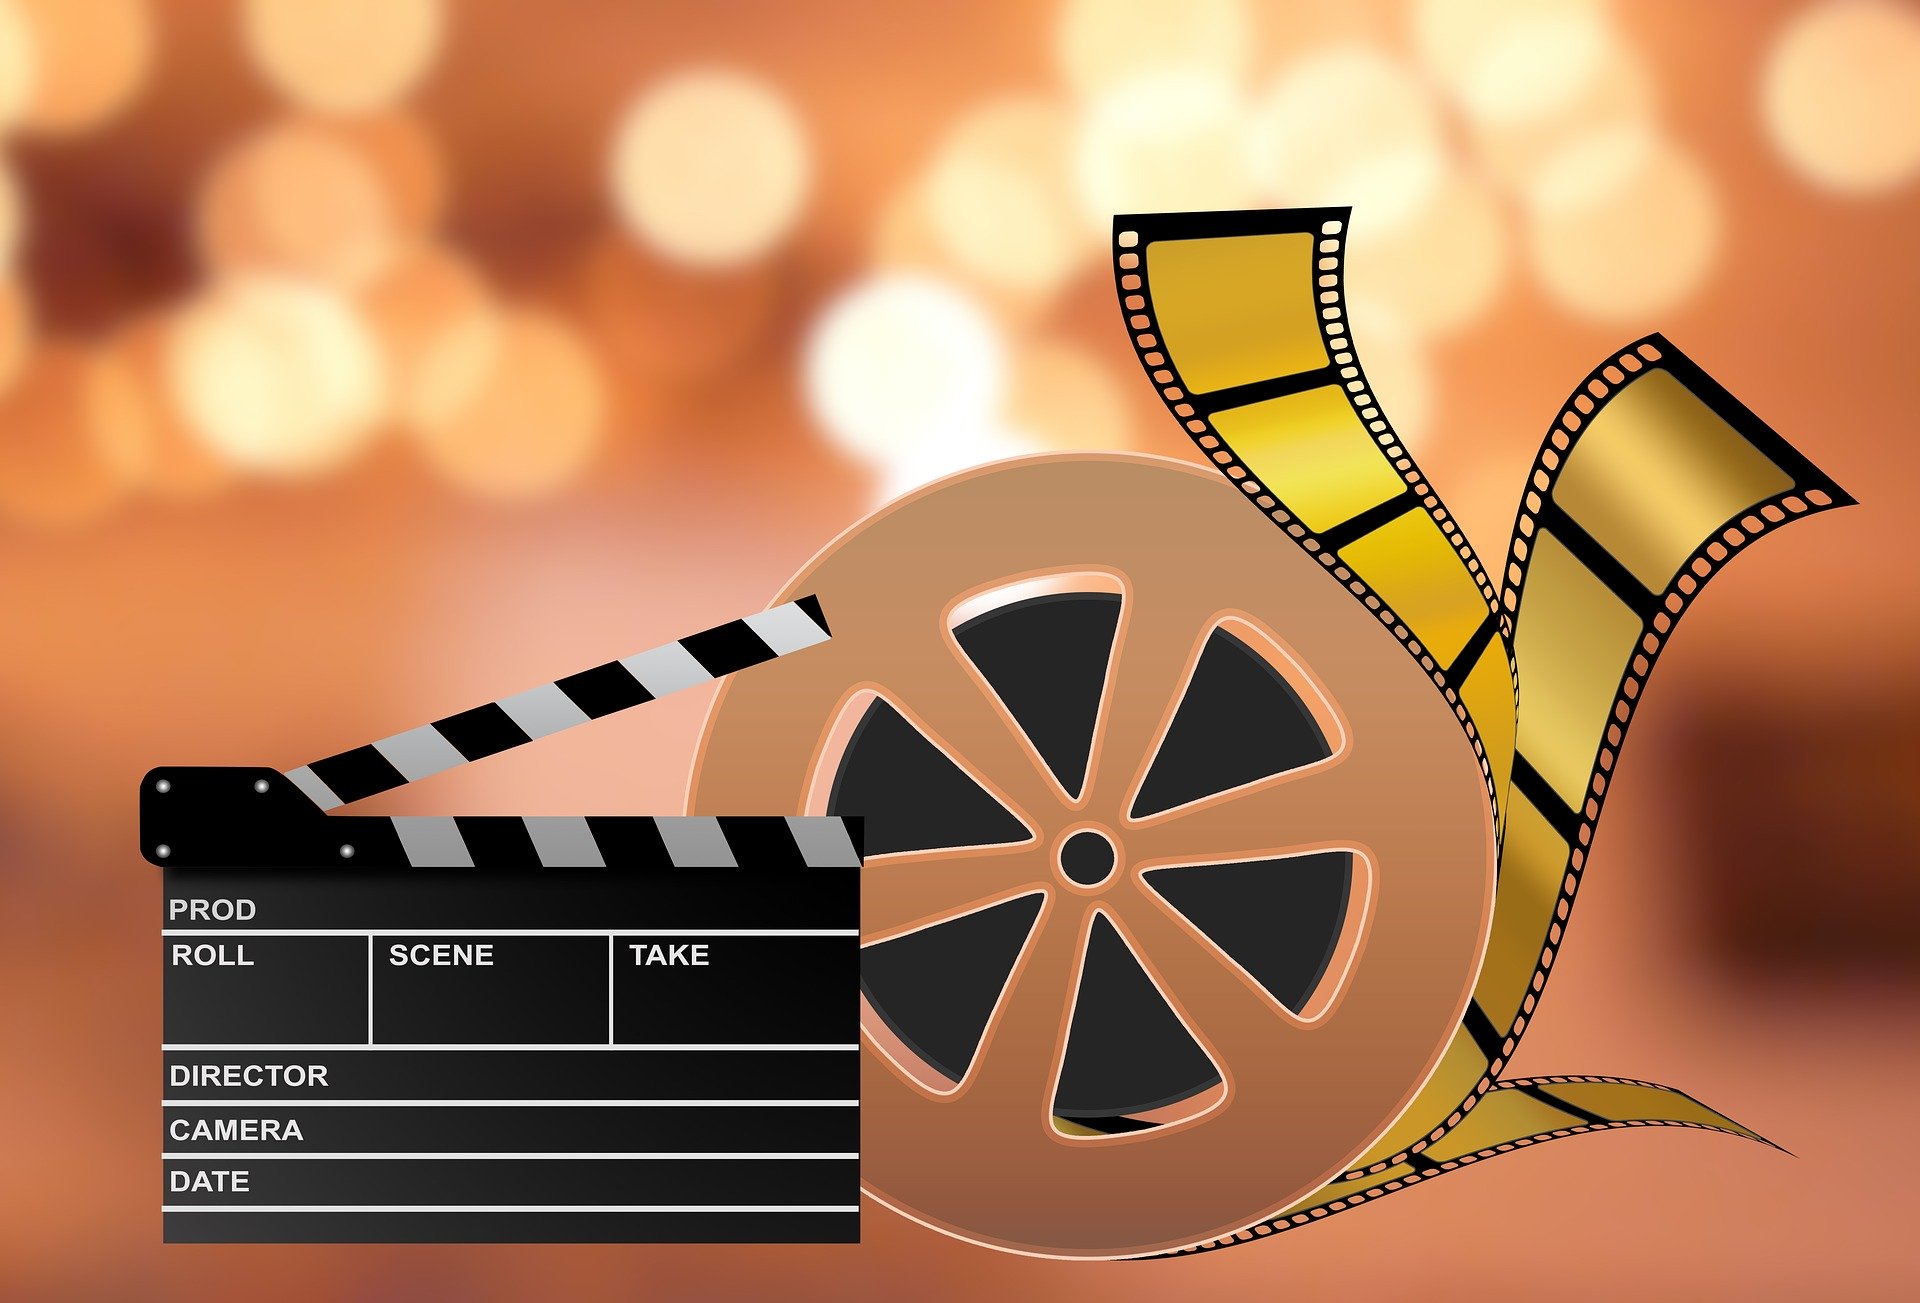 Top 5 Bollywood movies for working professional - Careerguide